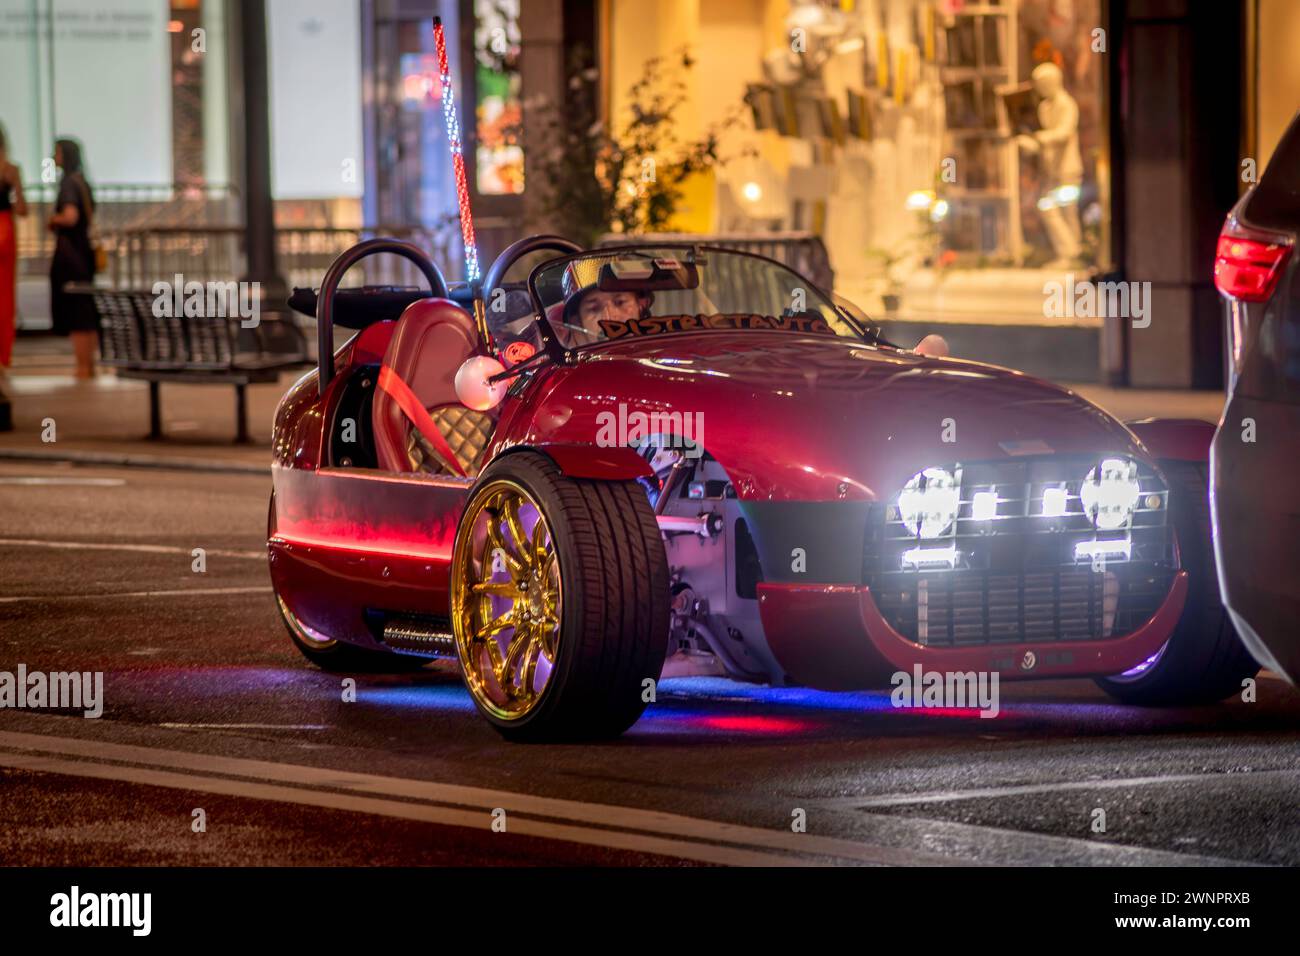 Three wheeled car on a street in New York at night Stock Photo